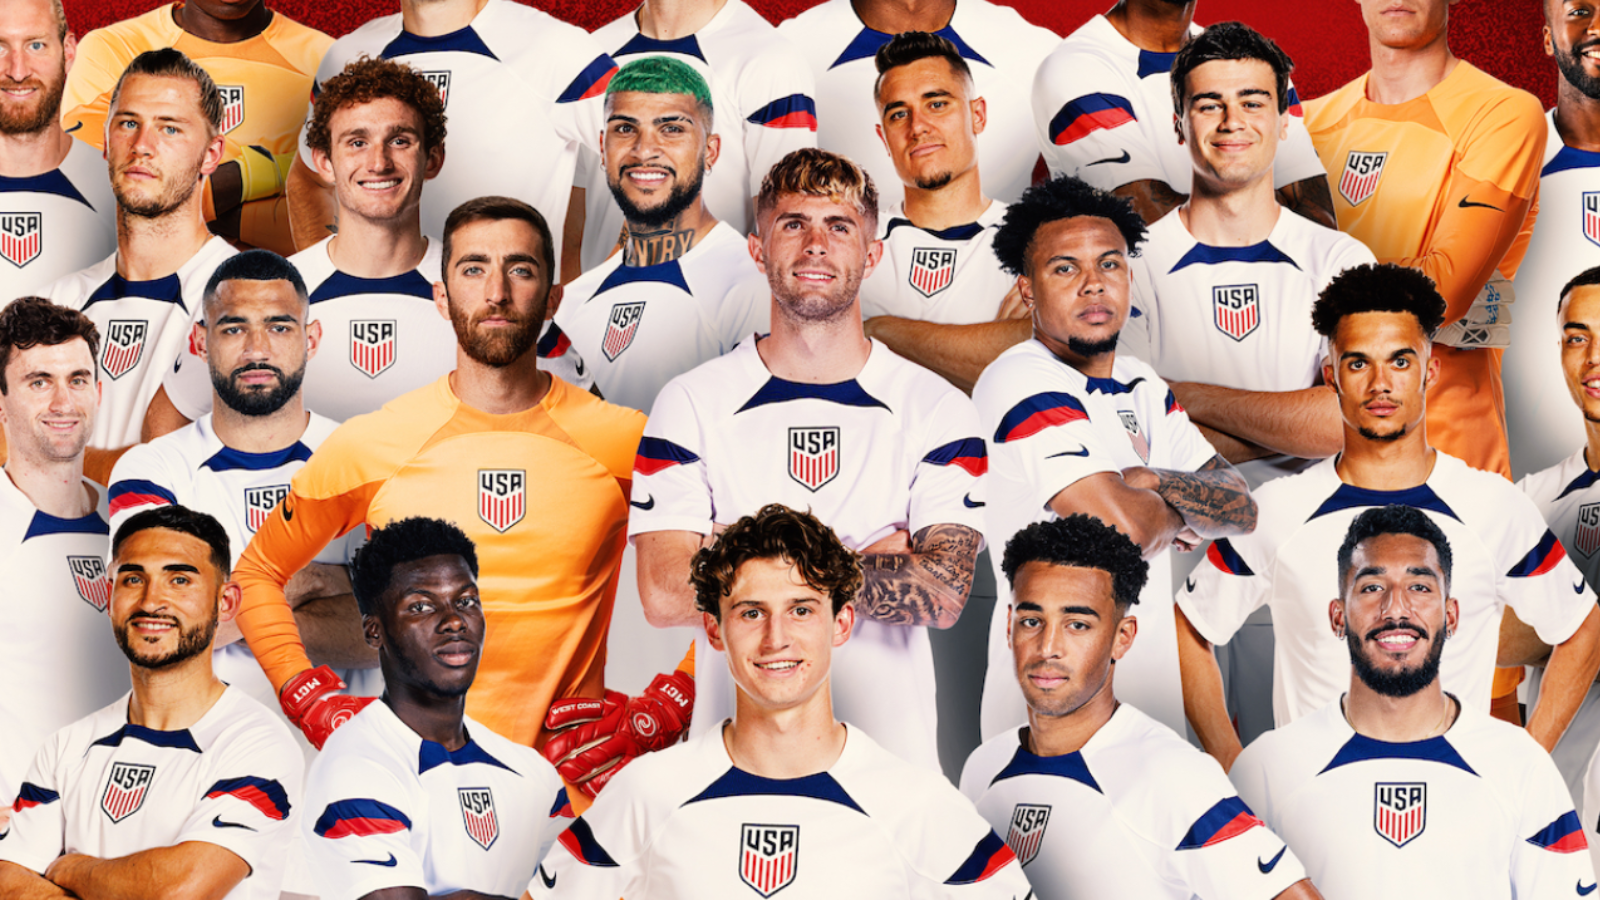 World Cup 2022 When Does USA Play Its First Match, and Odds of Winning